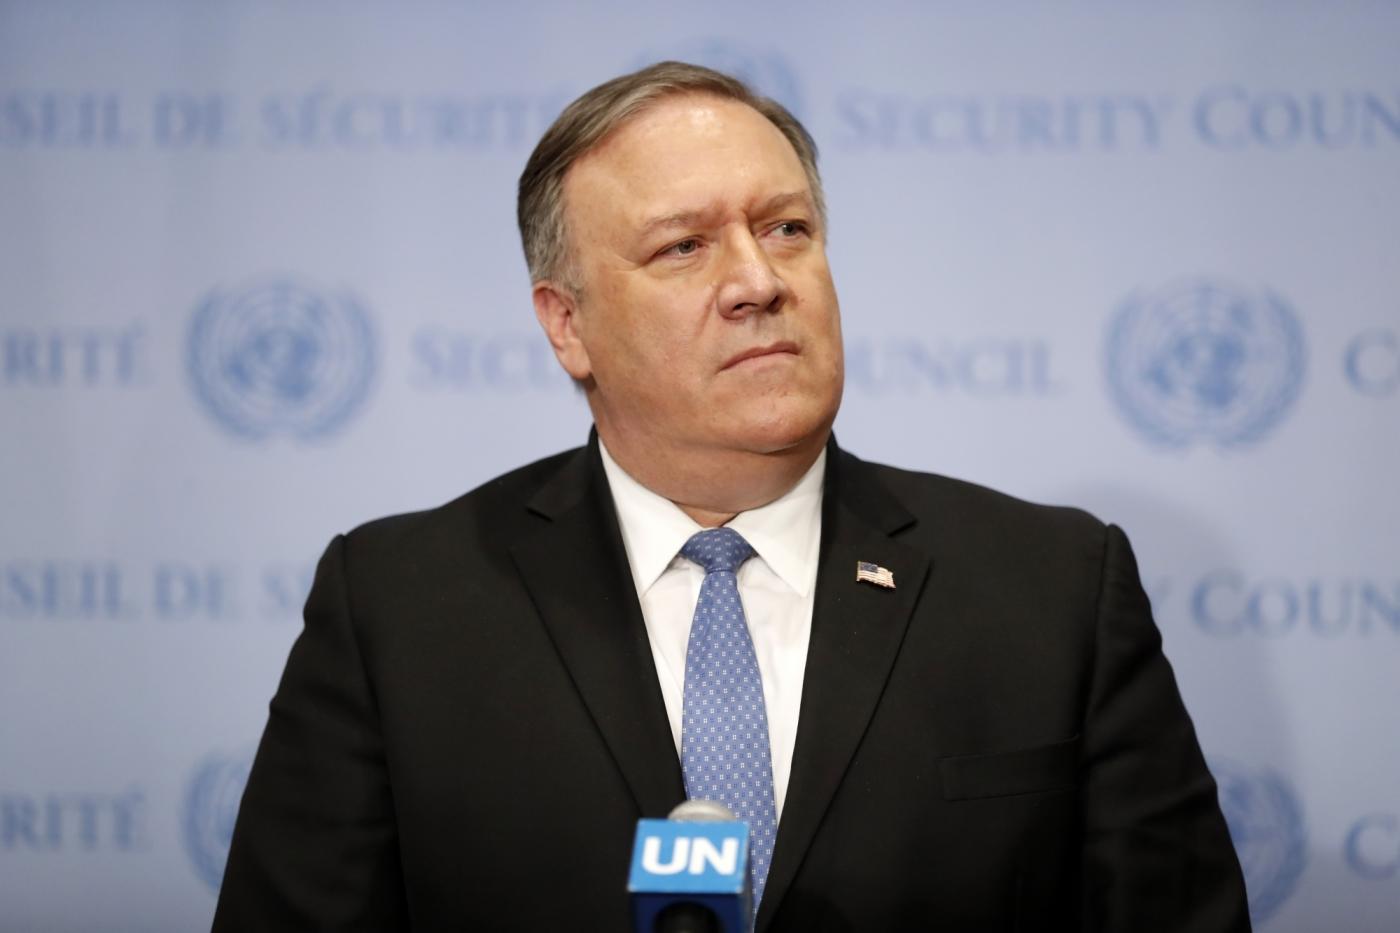 UNITED NATIONS, Dec. 12, 2018 (Xinhua) -- U.S. Secretary of State Mike Pompeo speaks to reporters after a Security Council meeting on non-proliferation at the United Nations headquarters in New York, Dec. 12, 2018. (Xinhua/Li Muzi/IANS) by .